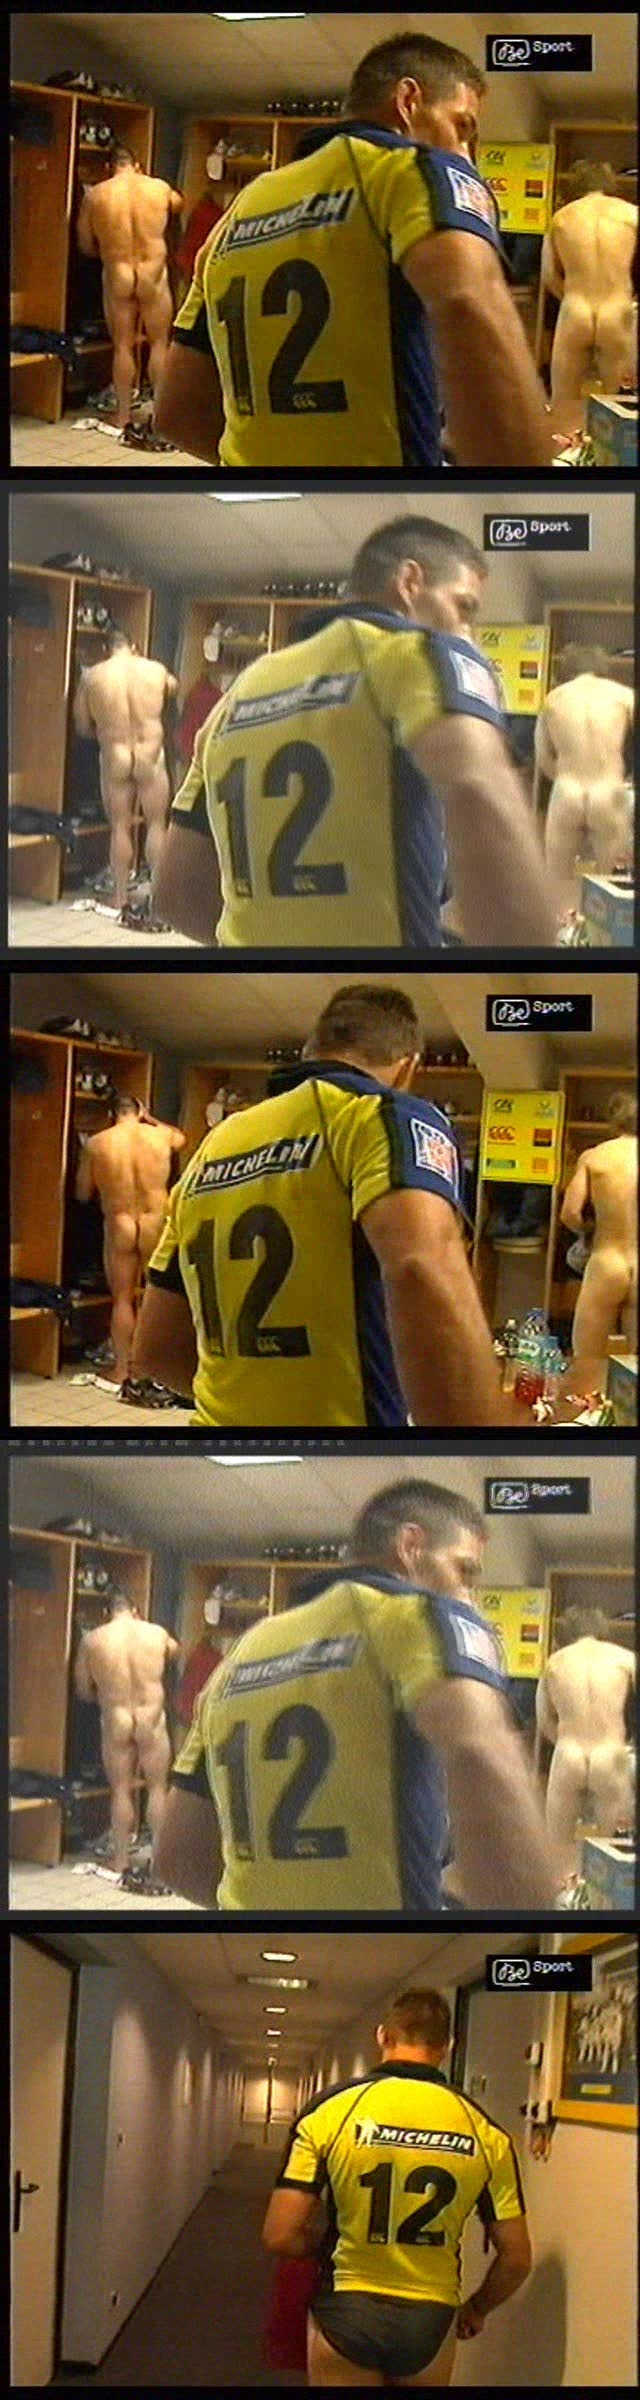 rugby player caught naked in clermont locker room